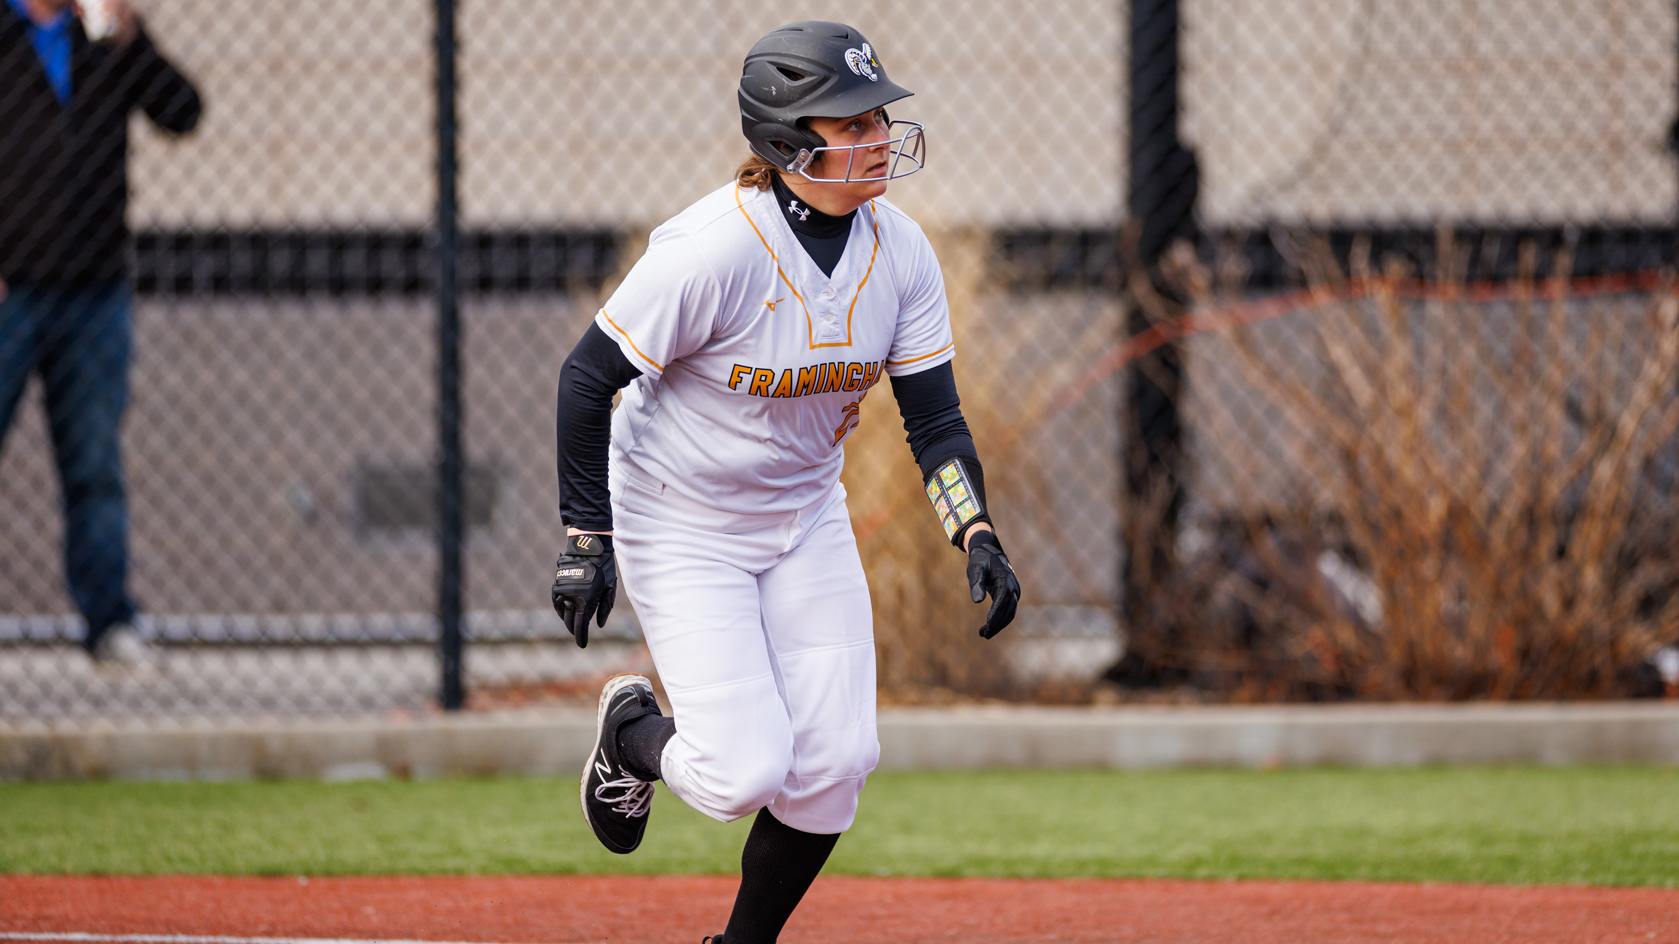 Softball Takes Game One over Westfield State 9-7 – Rams Fall in Game Two in 10 Innings